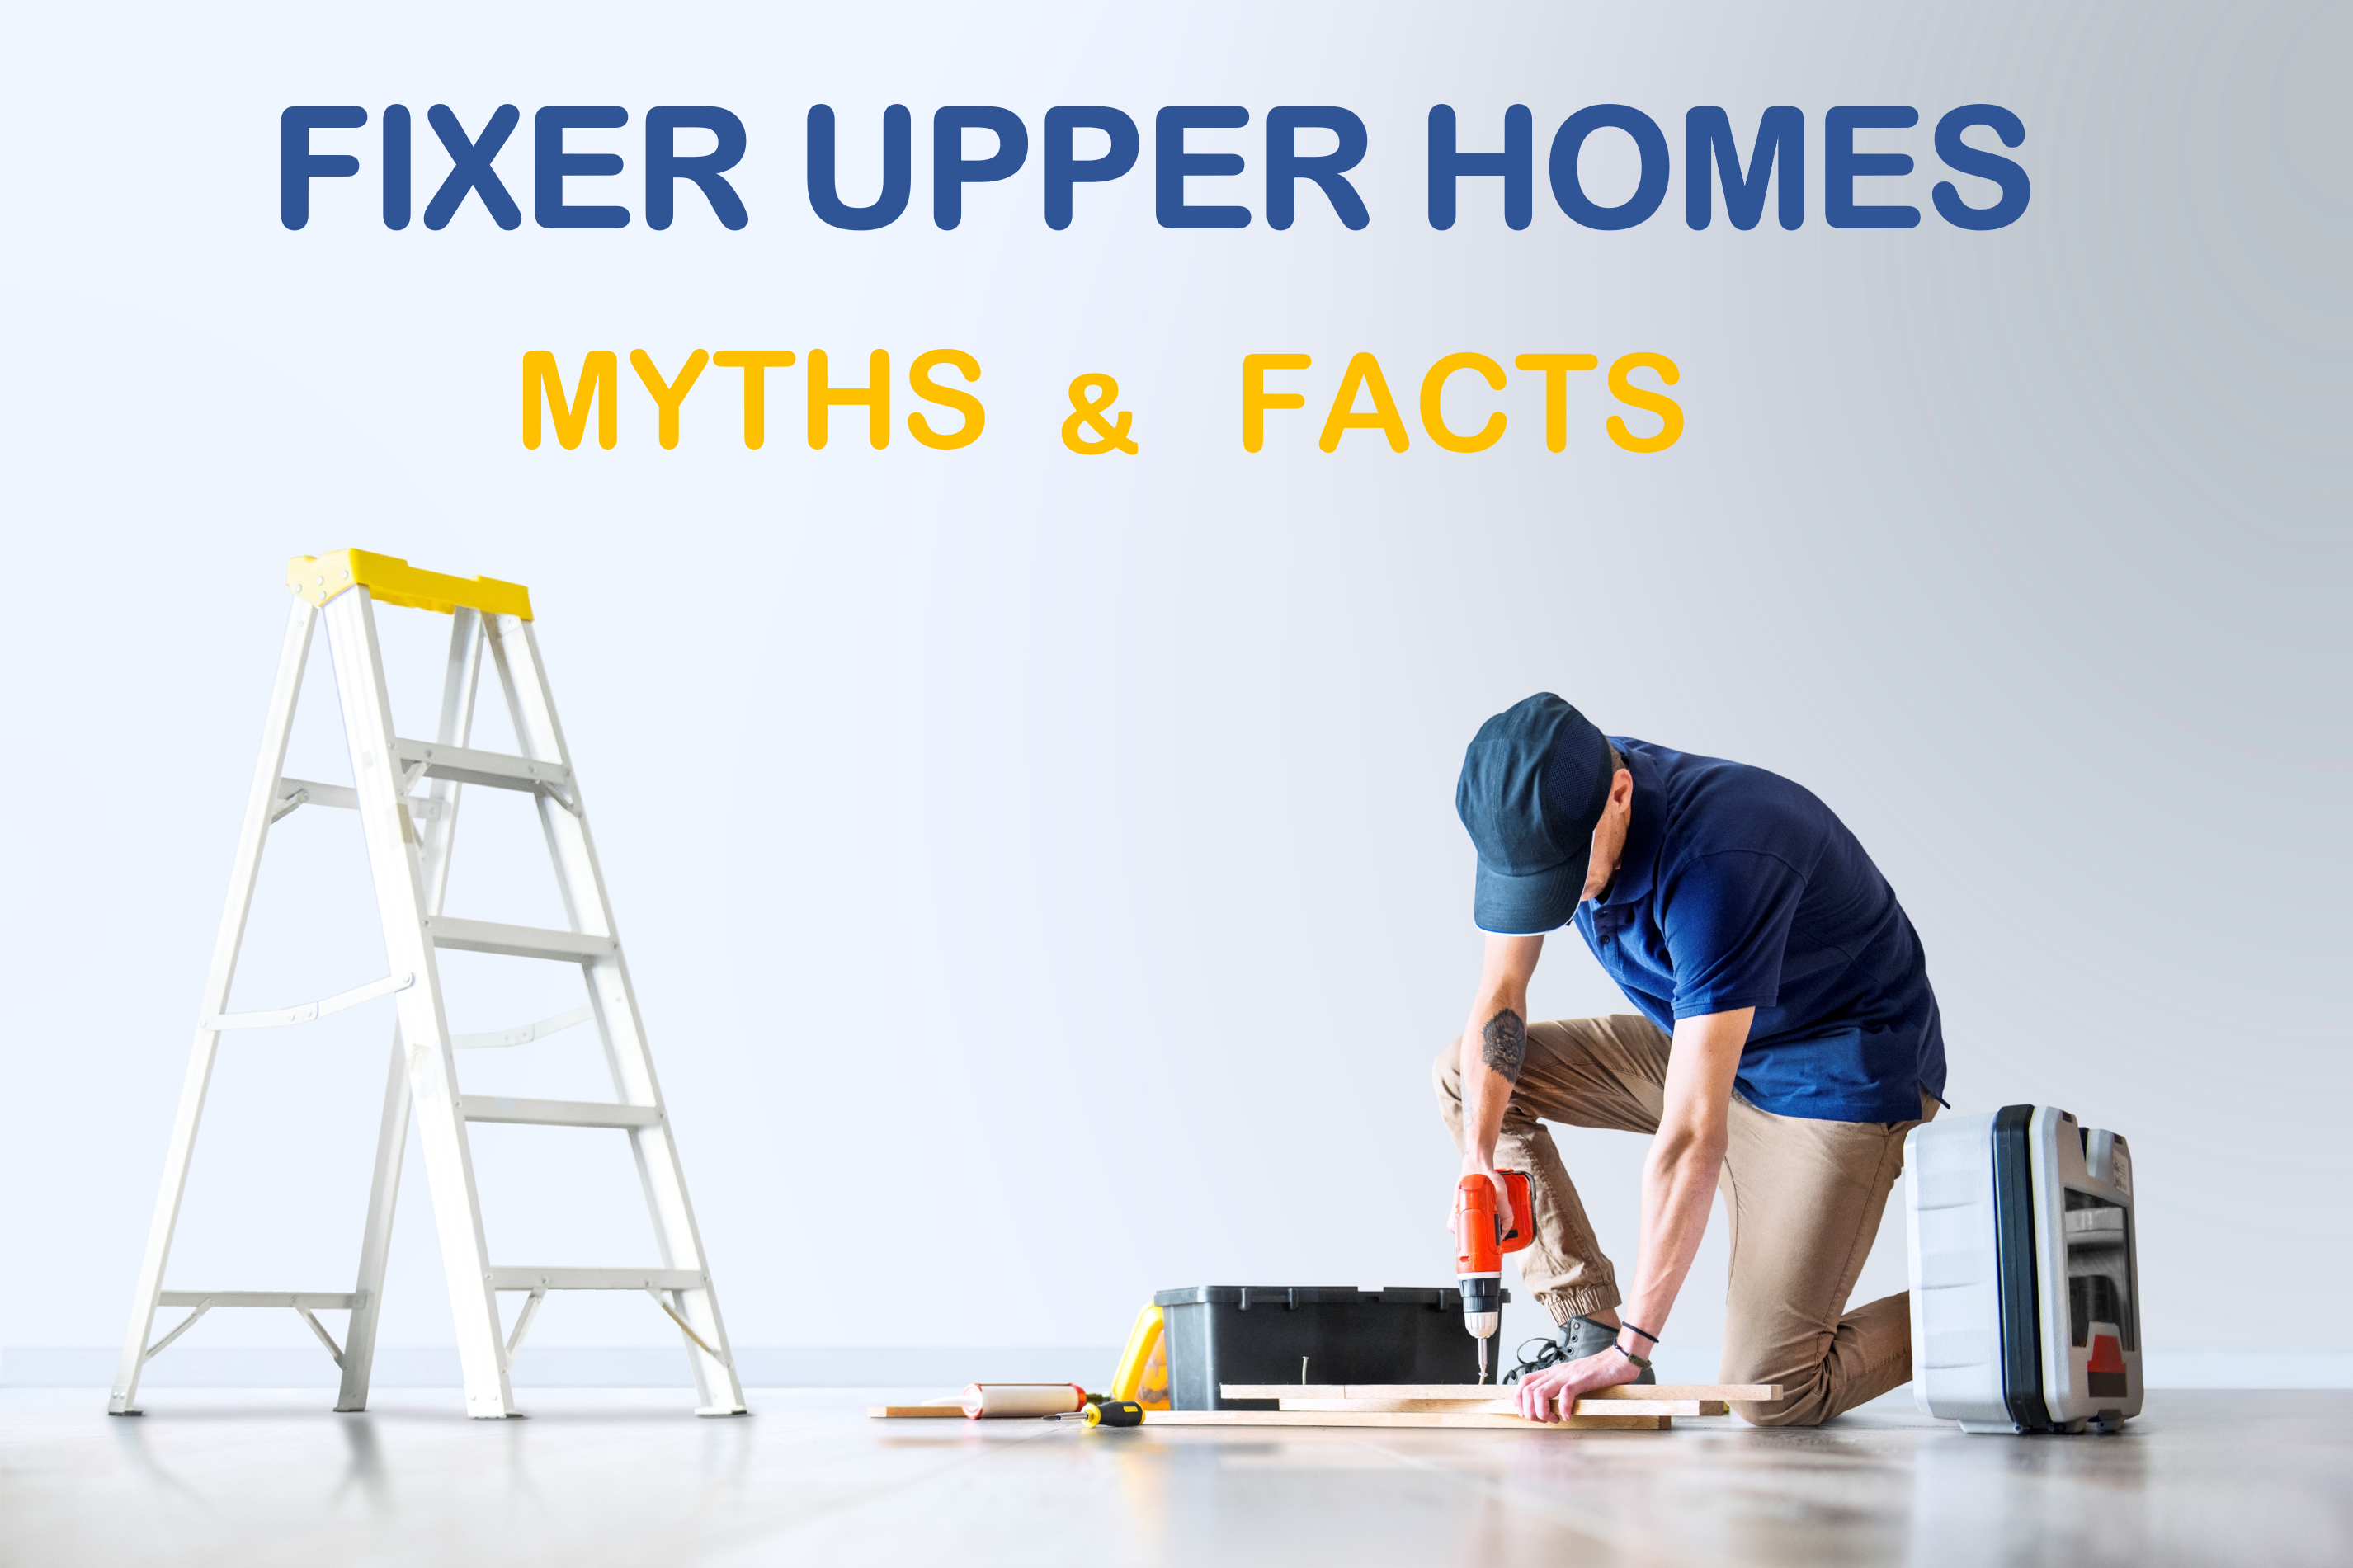 FIXER UPPER HOMES - MYTHS & FACTS